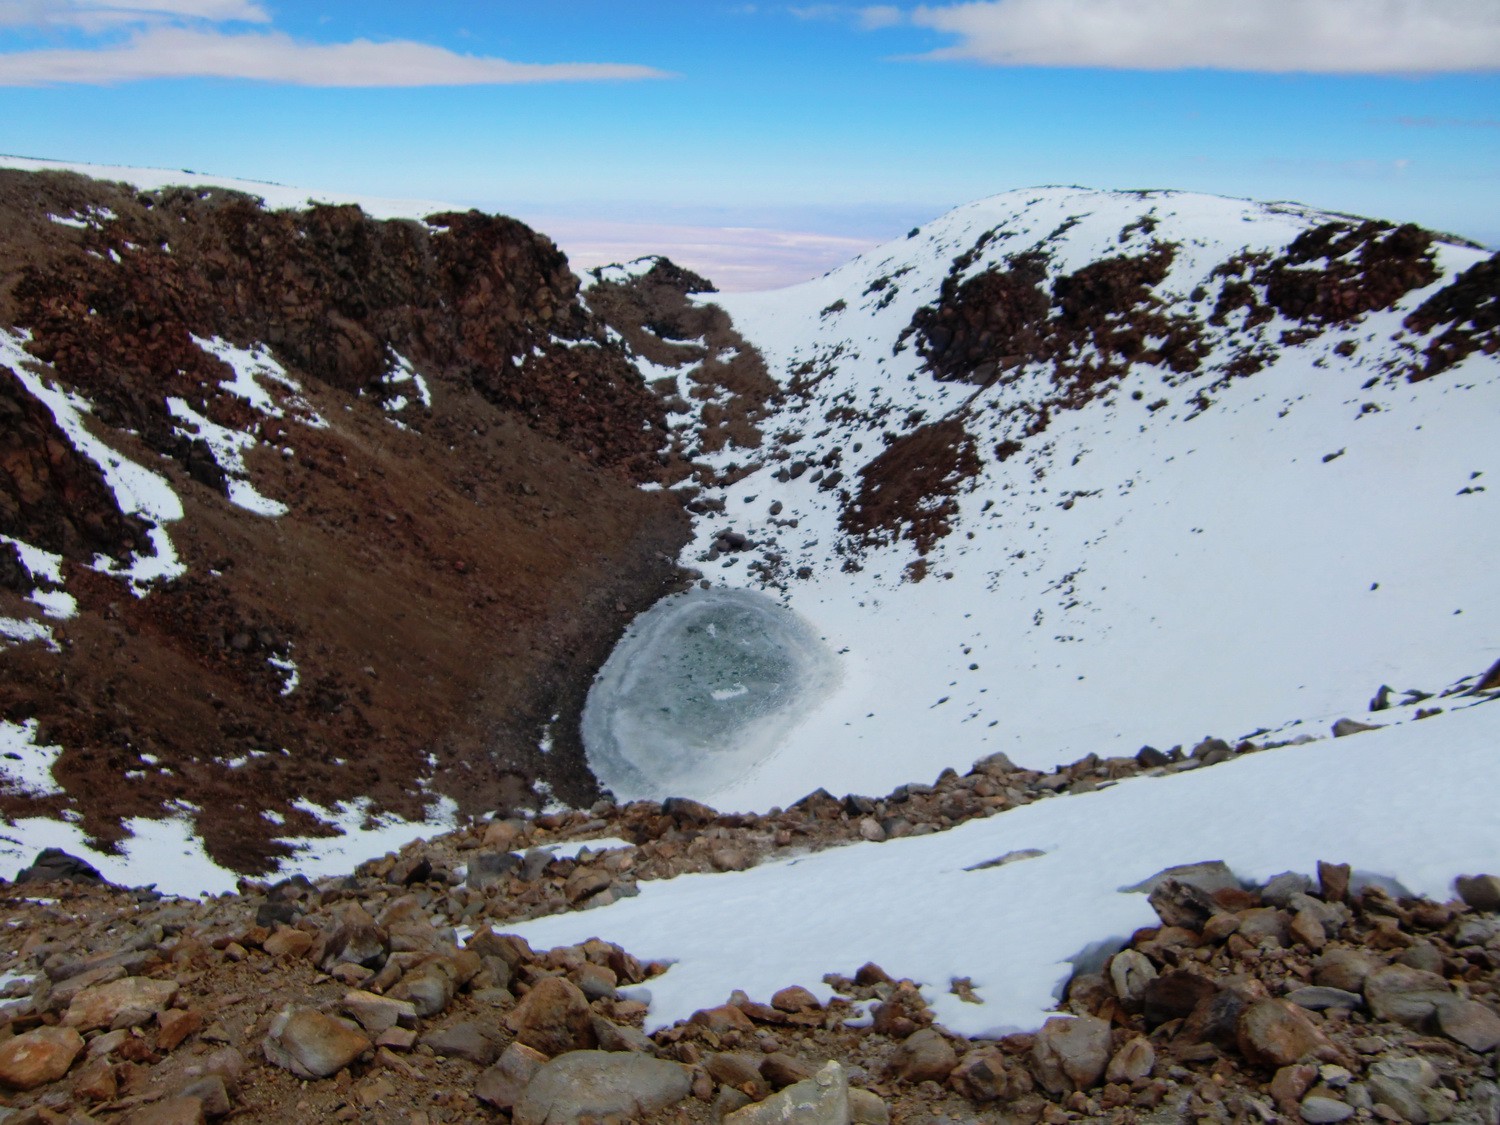 The crater of Licancabur with the frozen lake